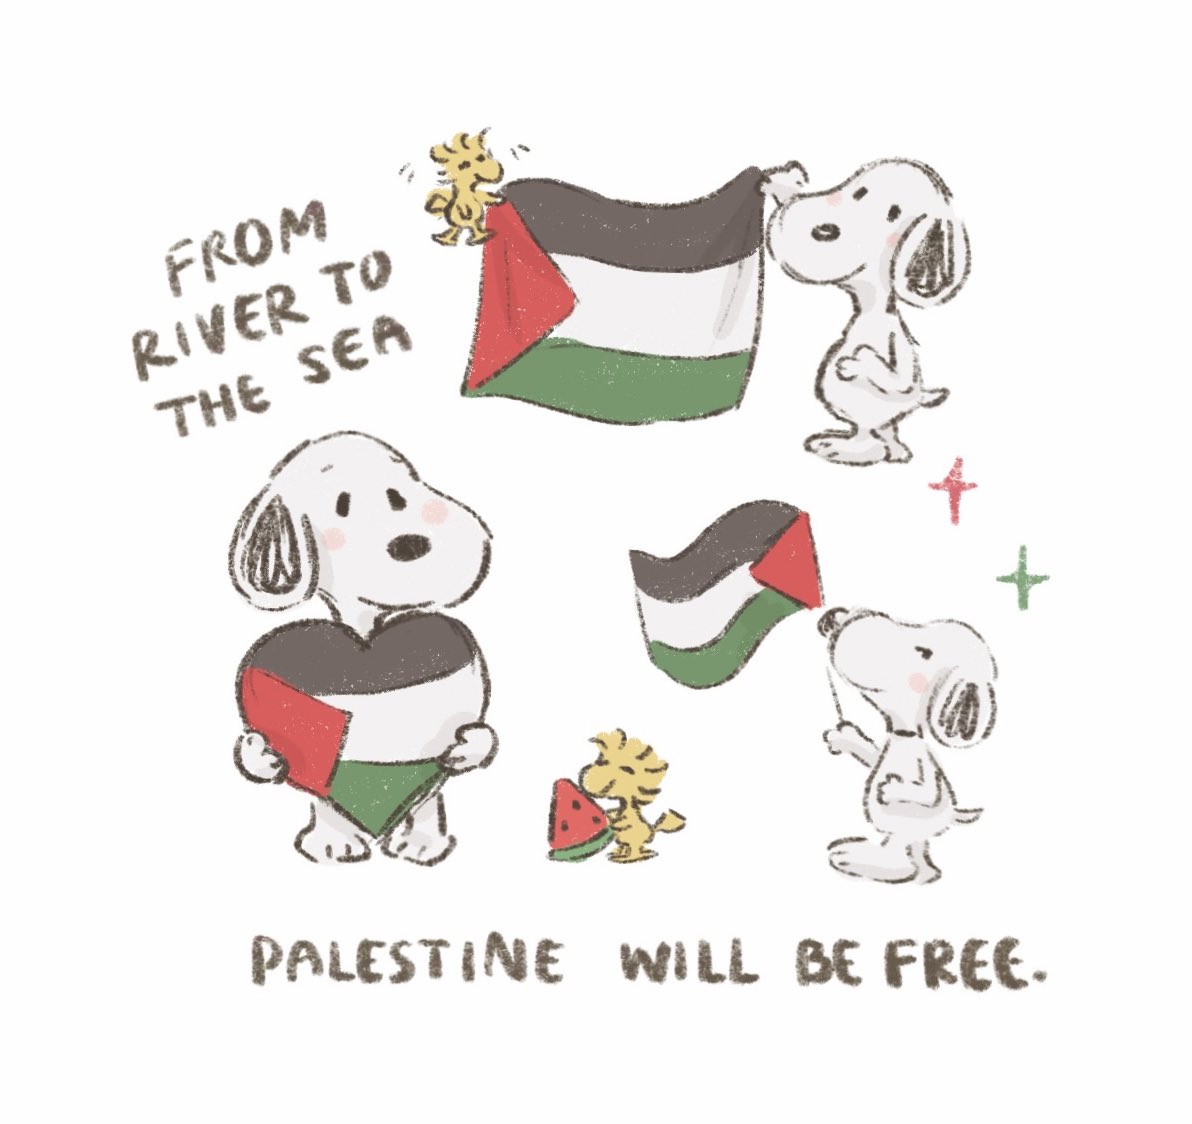 from river to the sea. free palestine #FreePalestine #CeasefireNOW